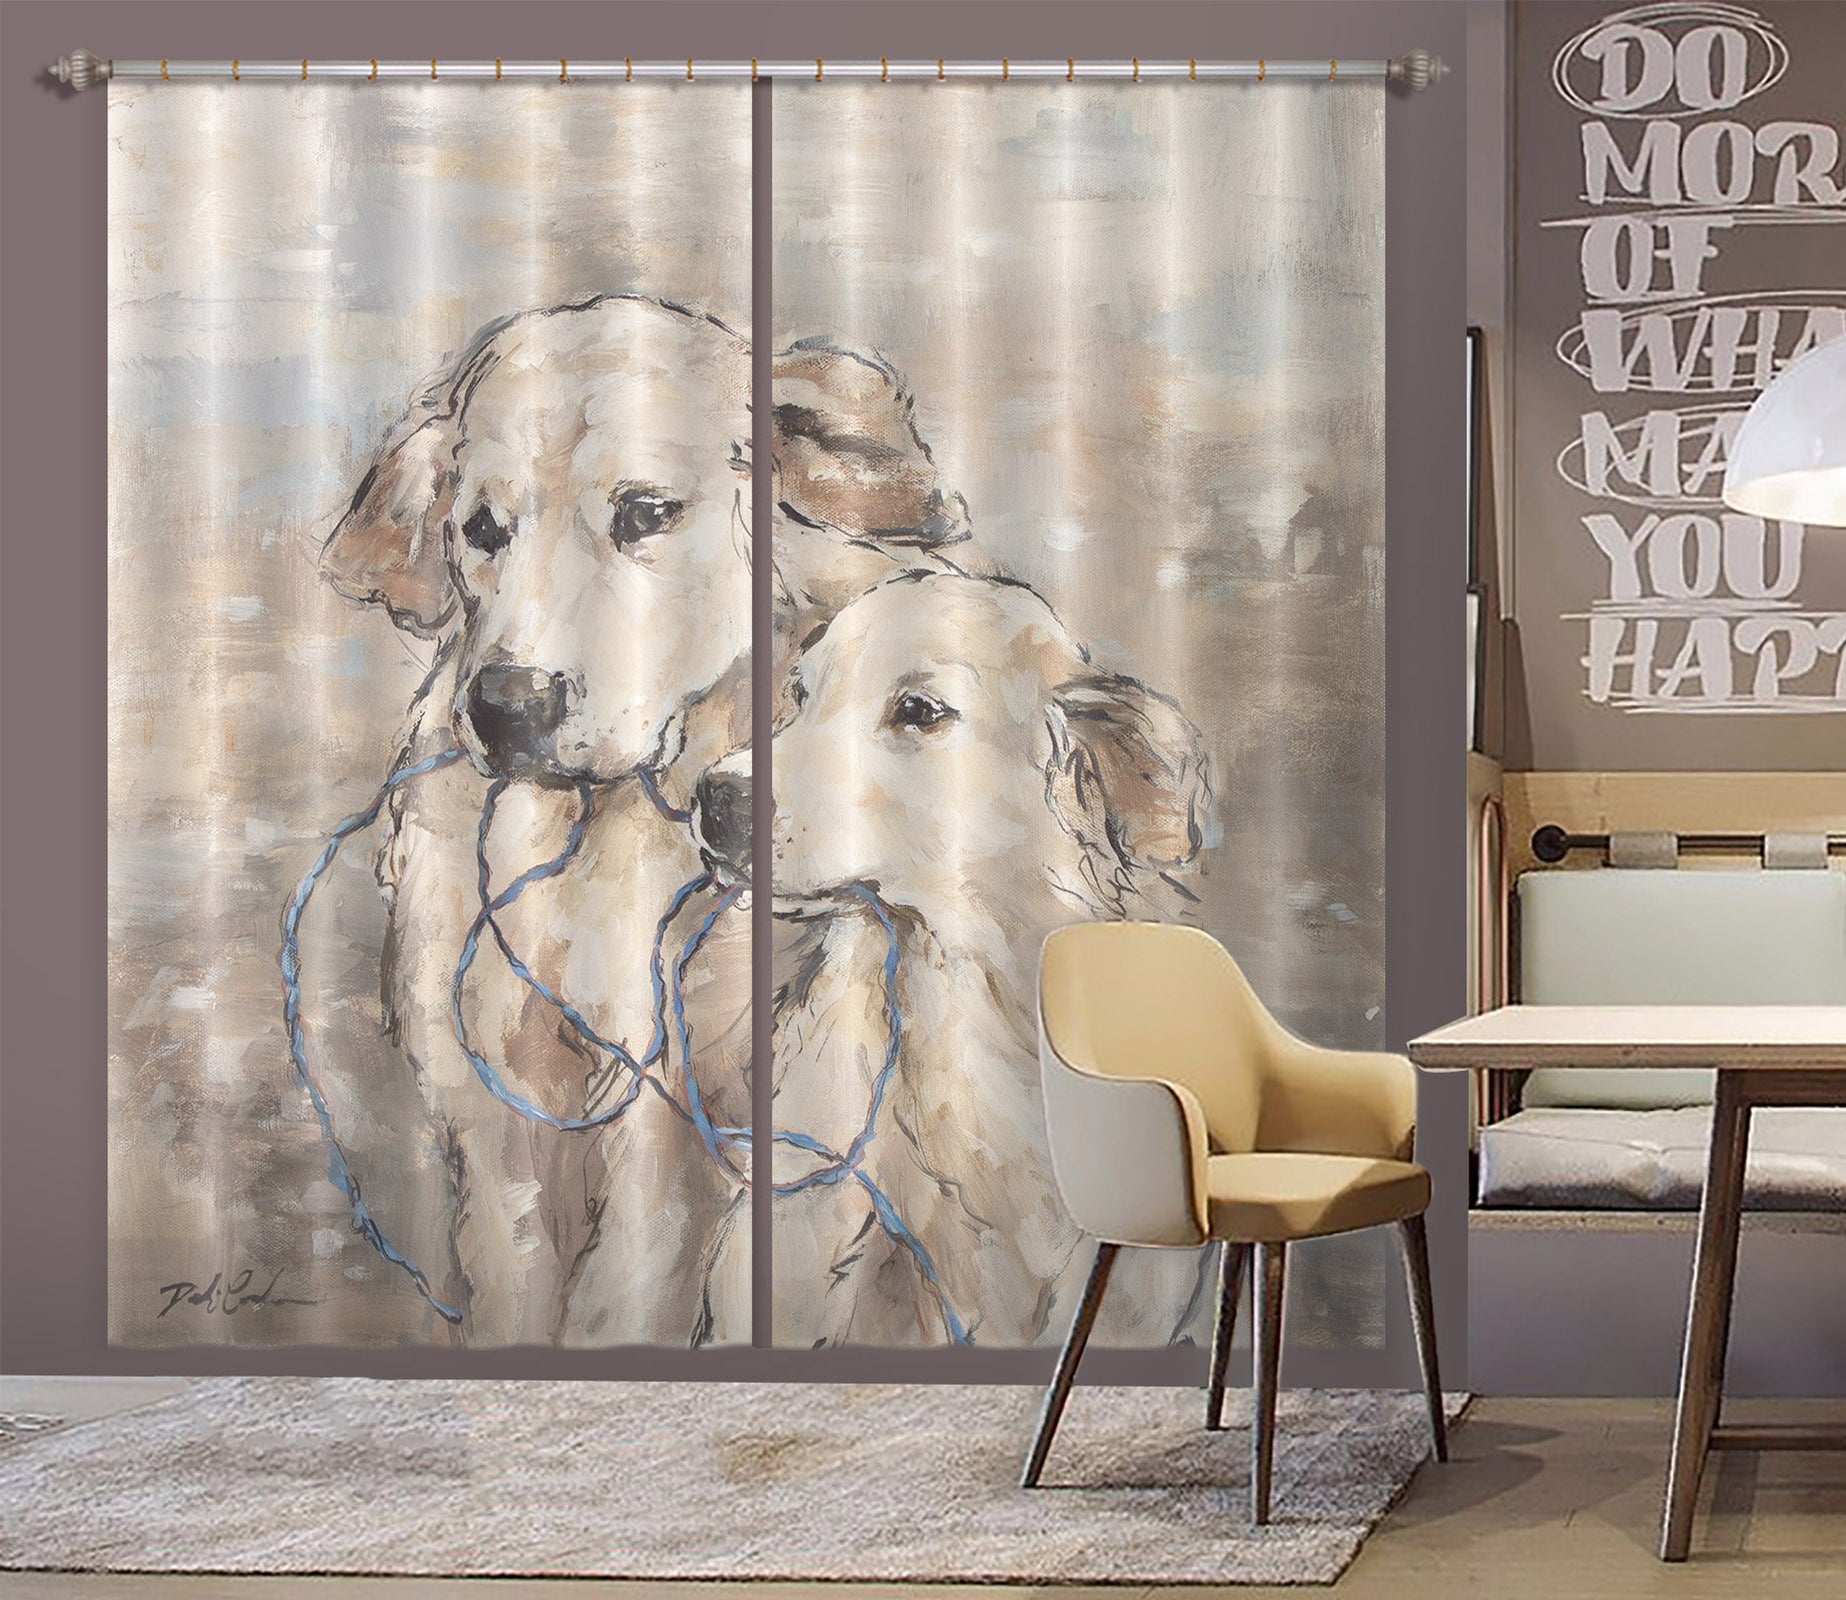 3D Dogs 2169 Debi Coules Curtain Curtains Drapes